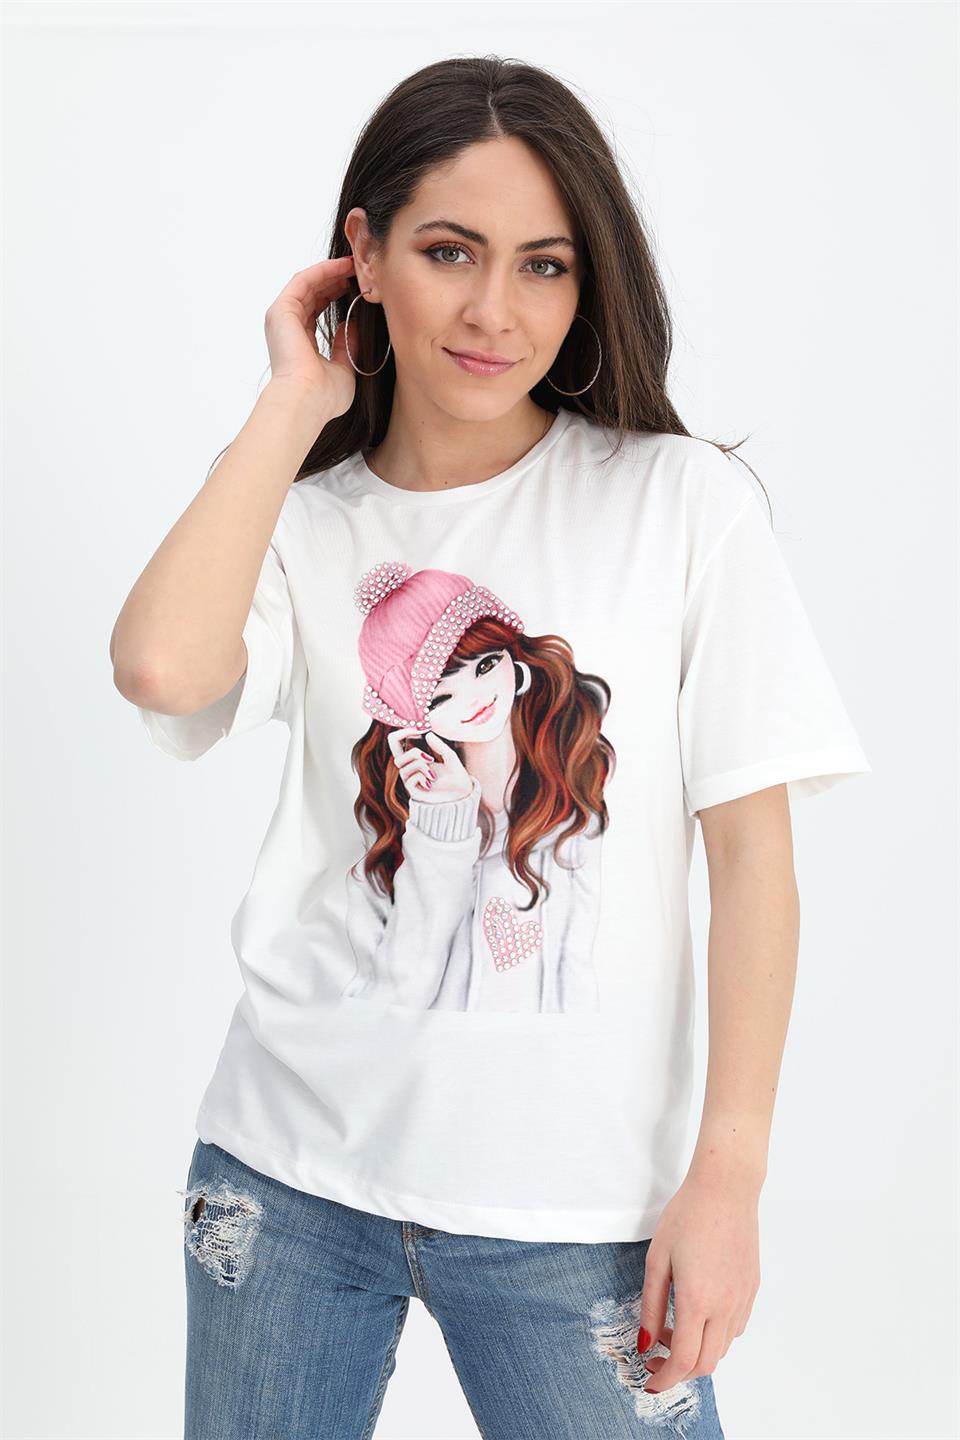 Women's T-shirt Girl Printed Stone Embroidered - Pink - STREETMODE™